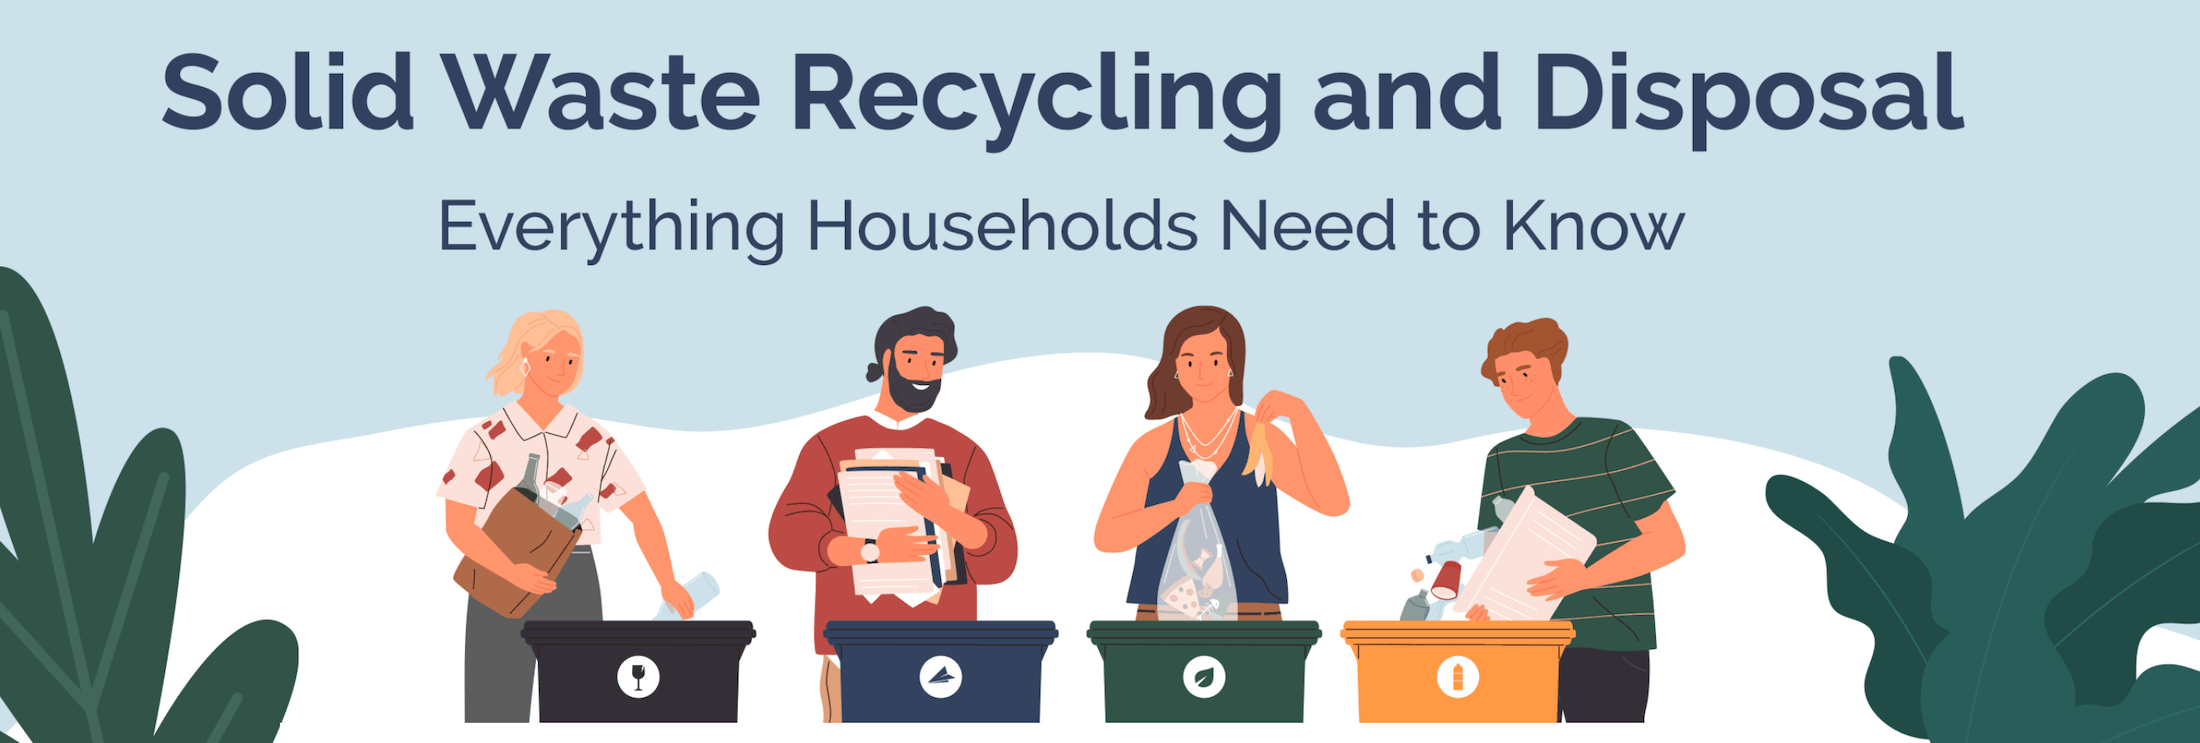 Everything Households Need to Know about Solid Waste Recycling and Disposal Featured Image